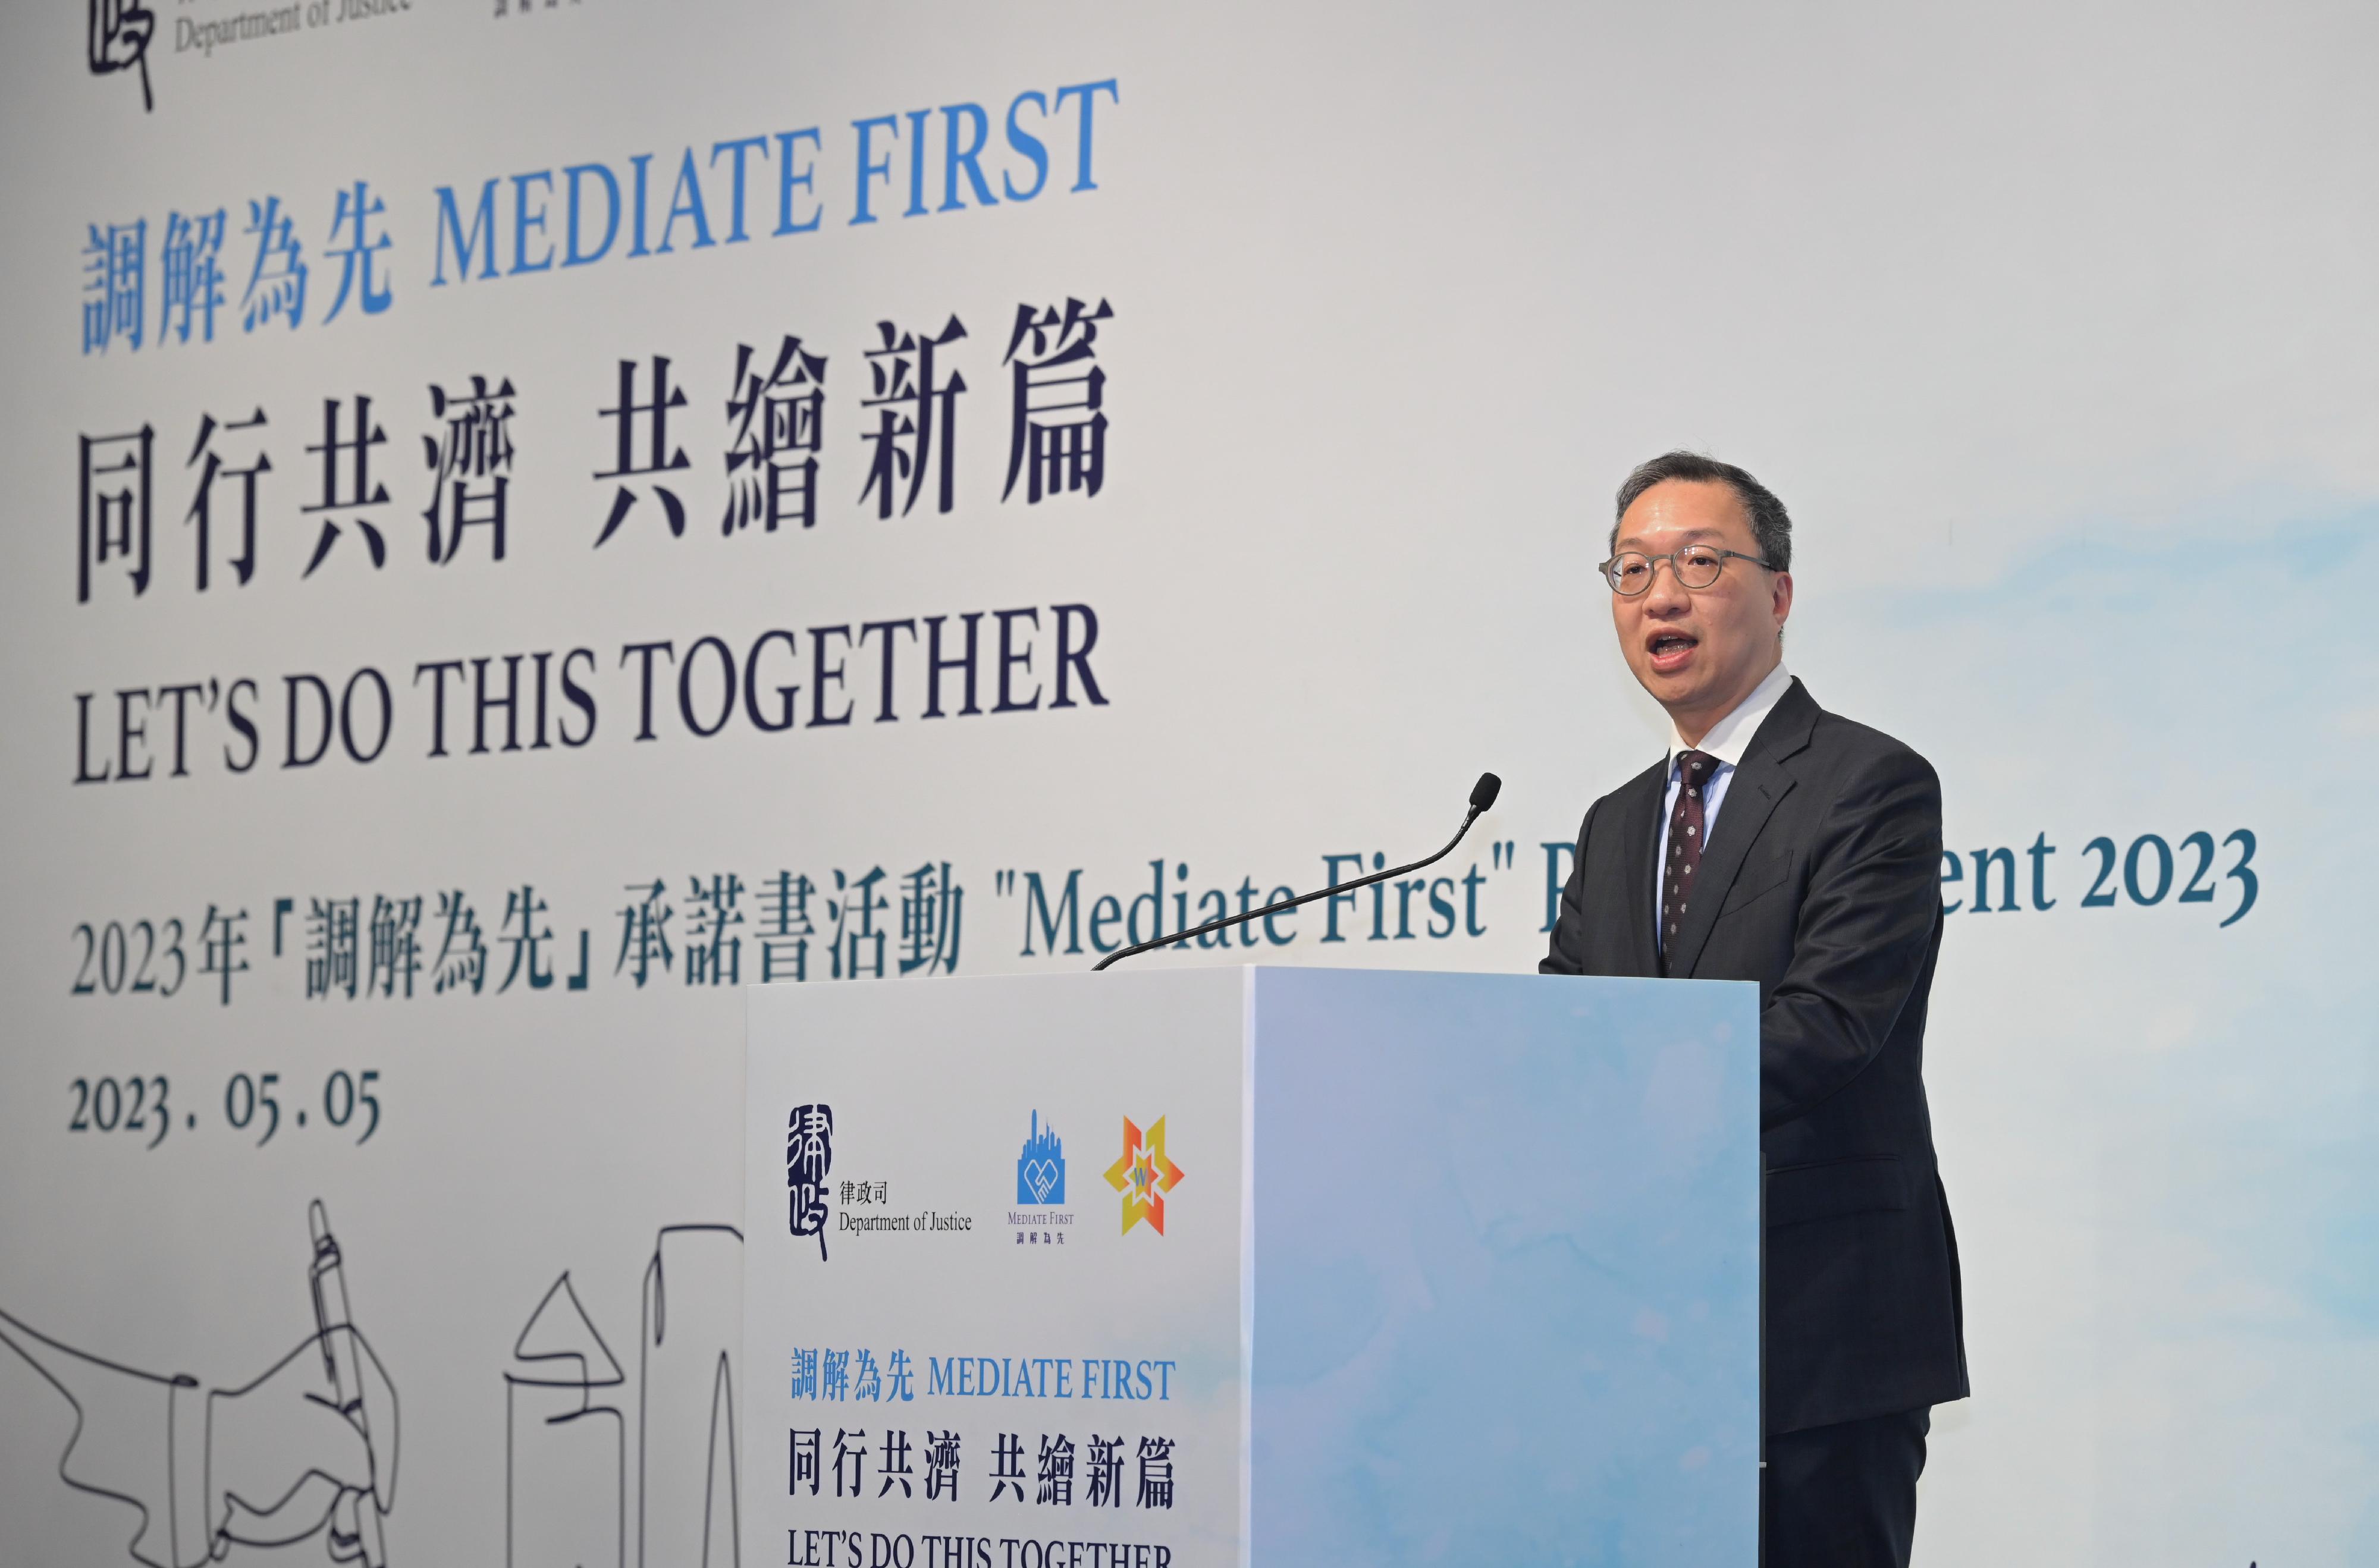 The biennial "Mediate First" Pledge Event organised by the Department of Justice was held today (May 5). Photo shows the Secretary for Justice, Mr Paul Lam, SC, delivering his opening remarks.
